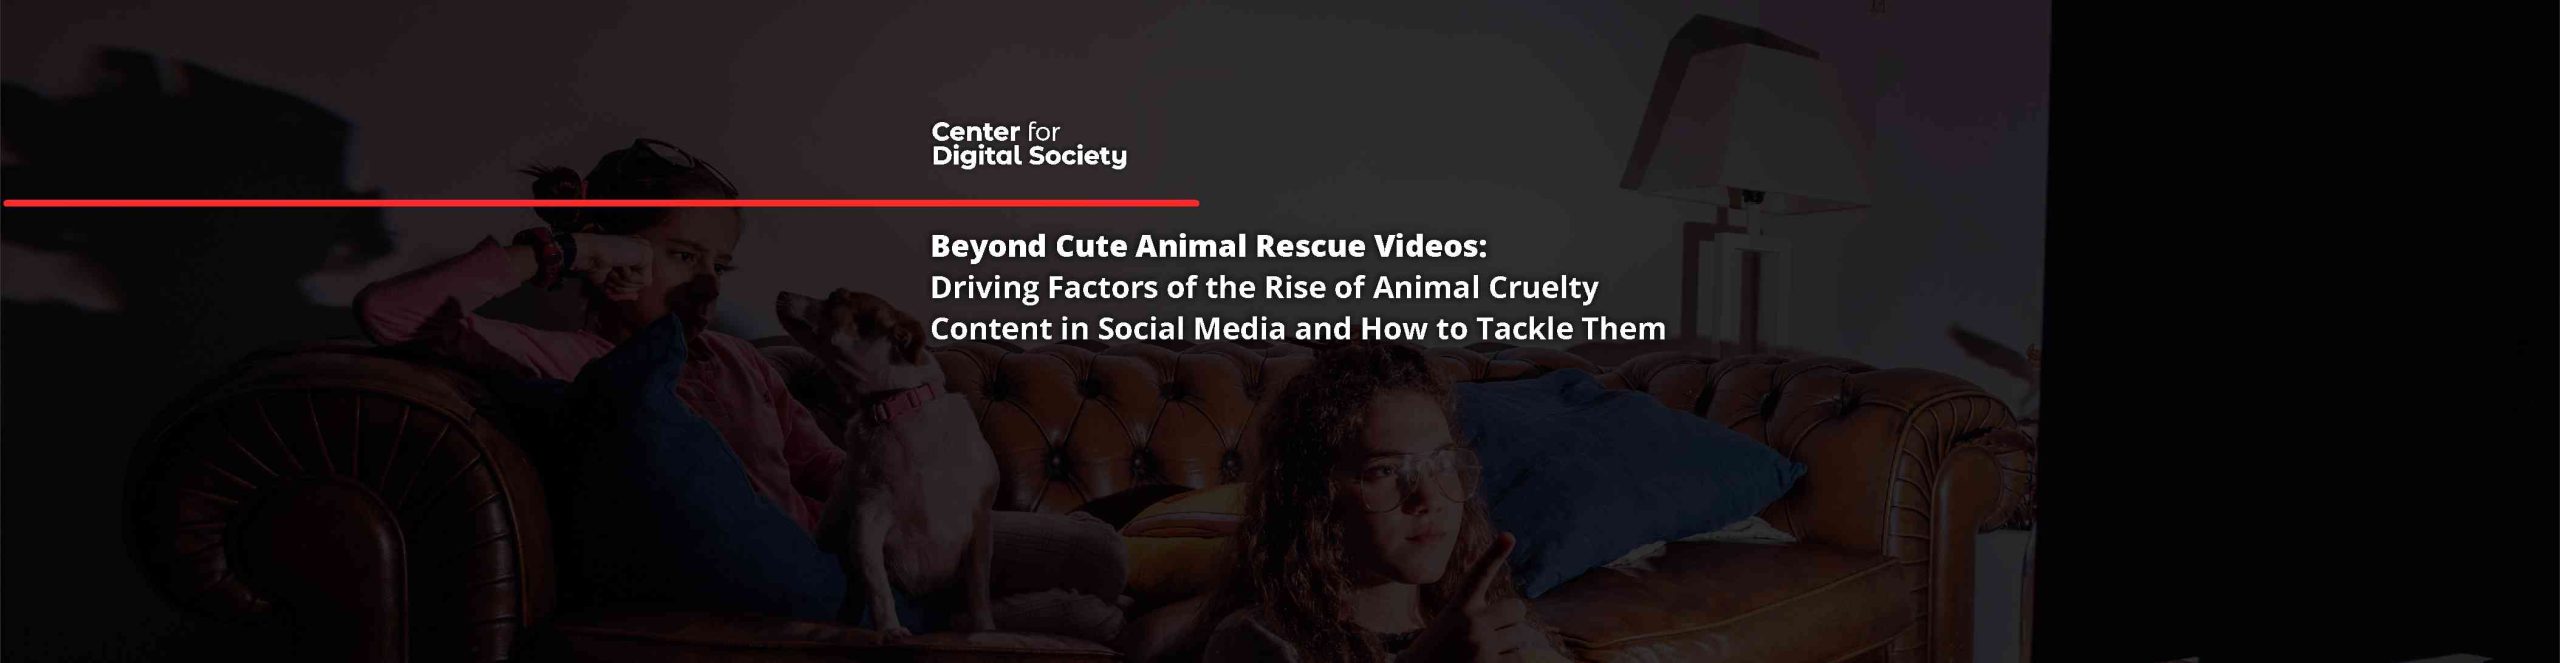 Beyond Cute Animal Rescue Videos: Driving Factors of the Rise of Animal  Cruelty Content in Social Media and How to Tackle Them : Center for Digital  Society